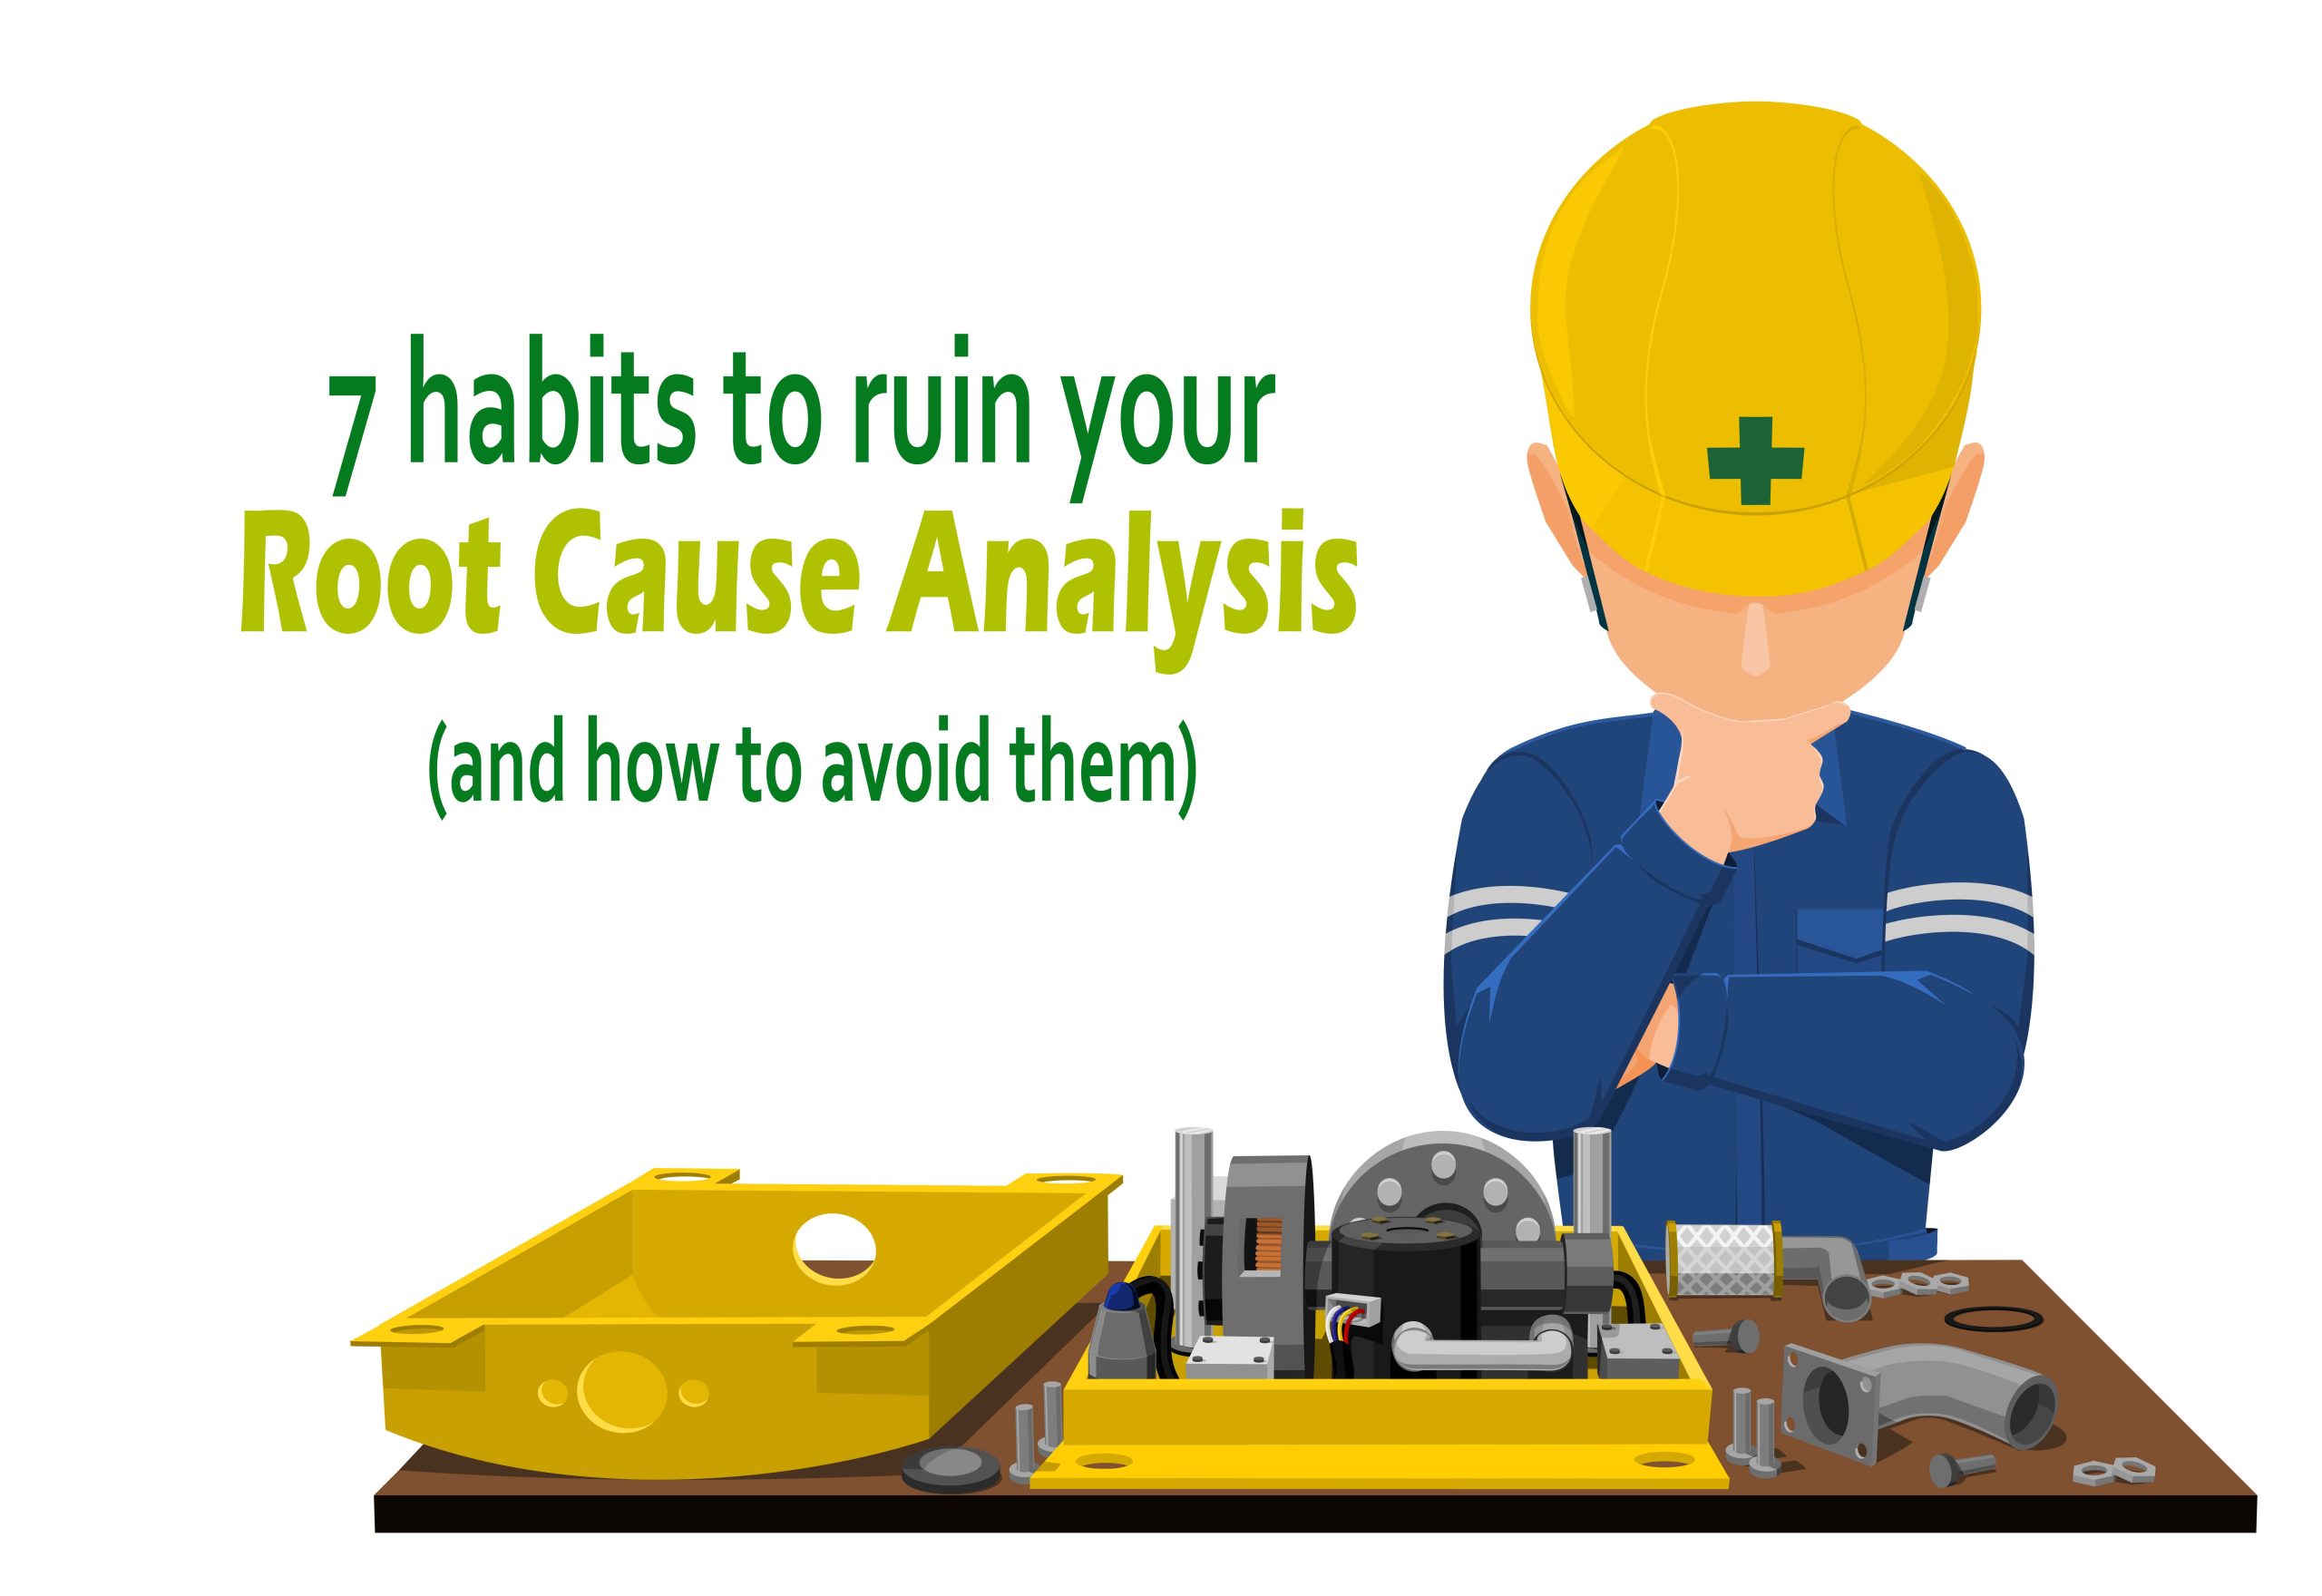 7 habits to ruin your Root Cause Analysis (and how to avoid them)